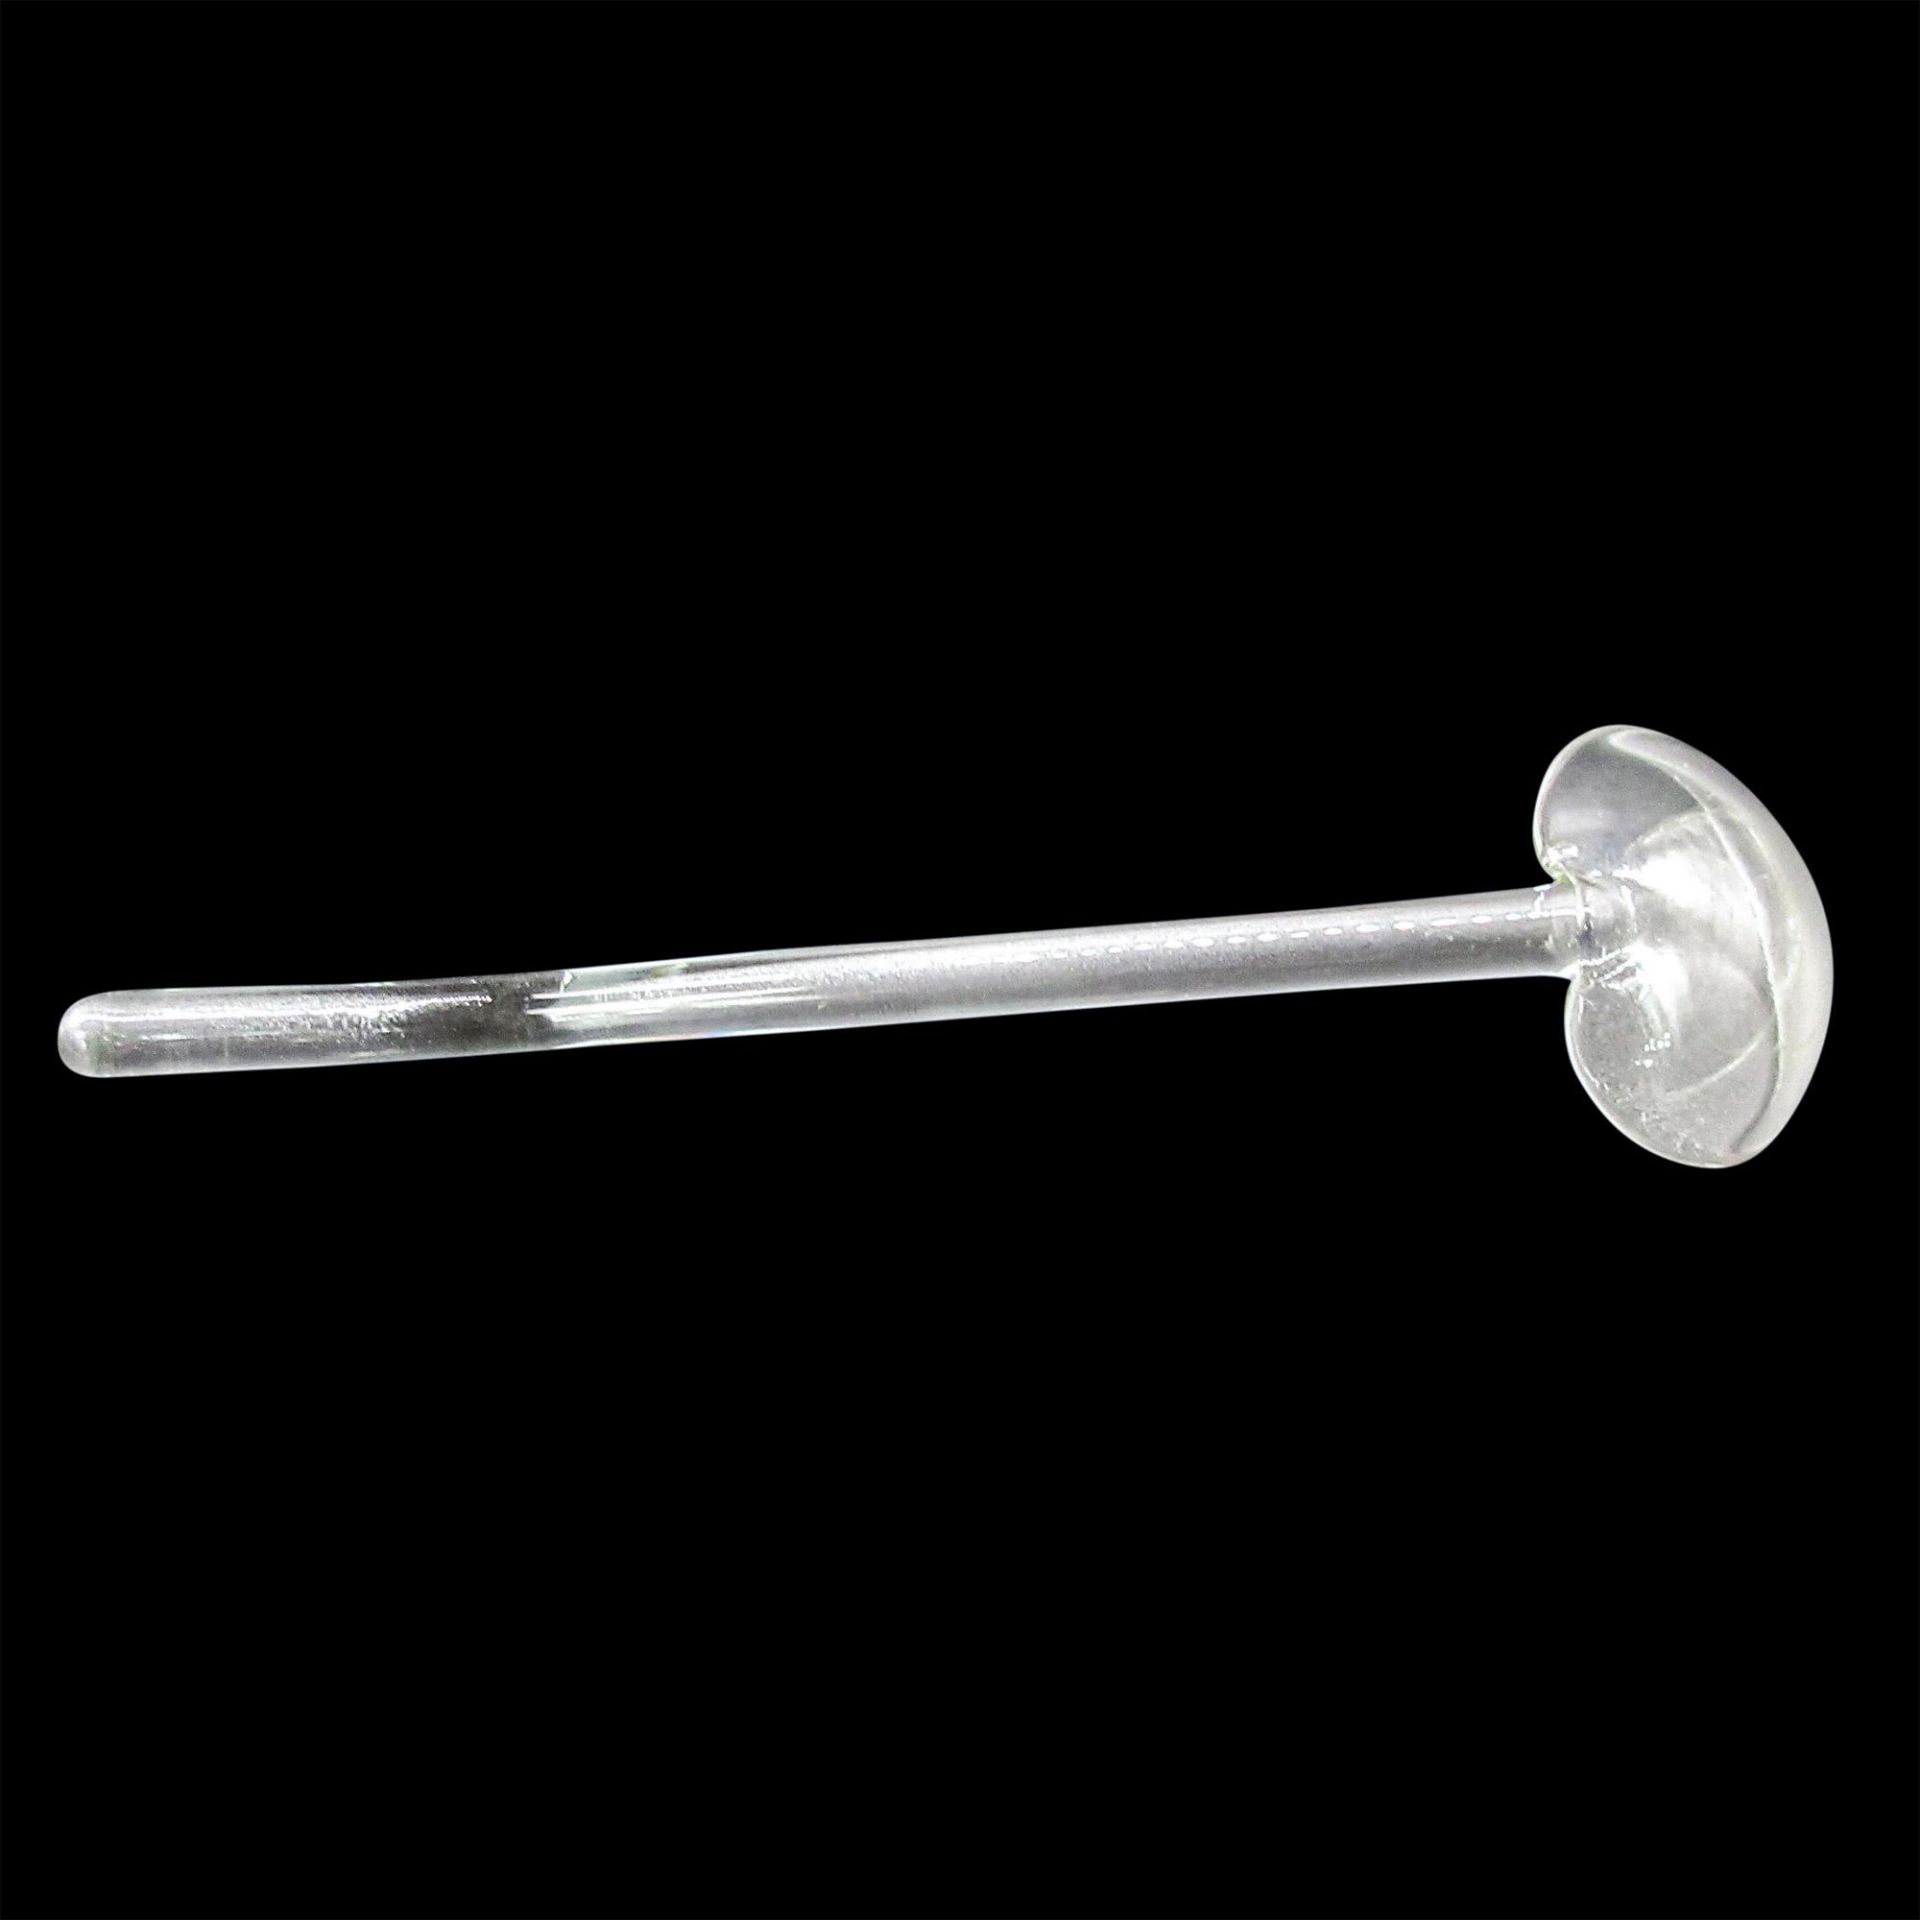 5pc Small Glass Ladles - Image 7 of 16